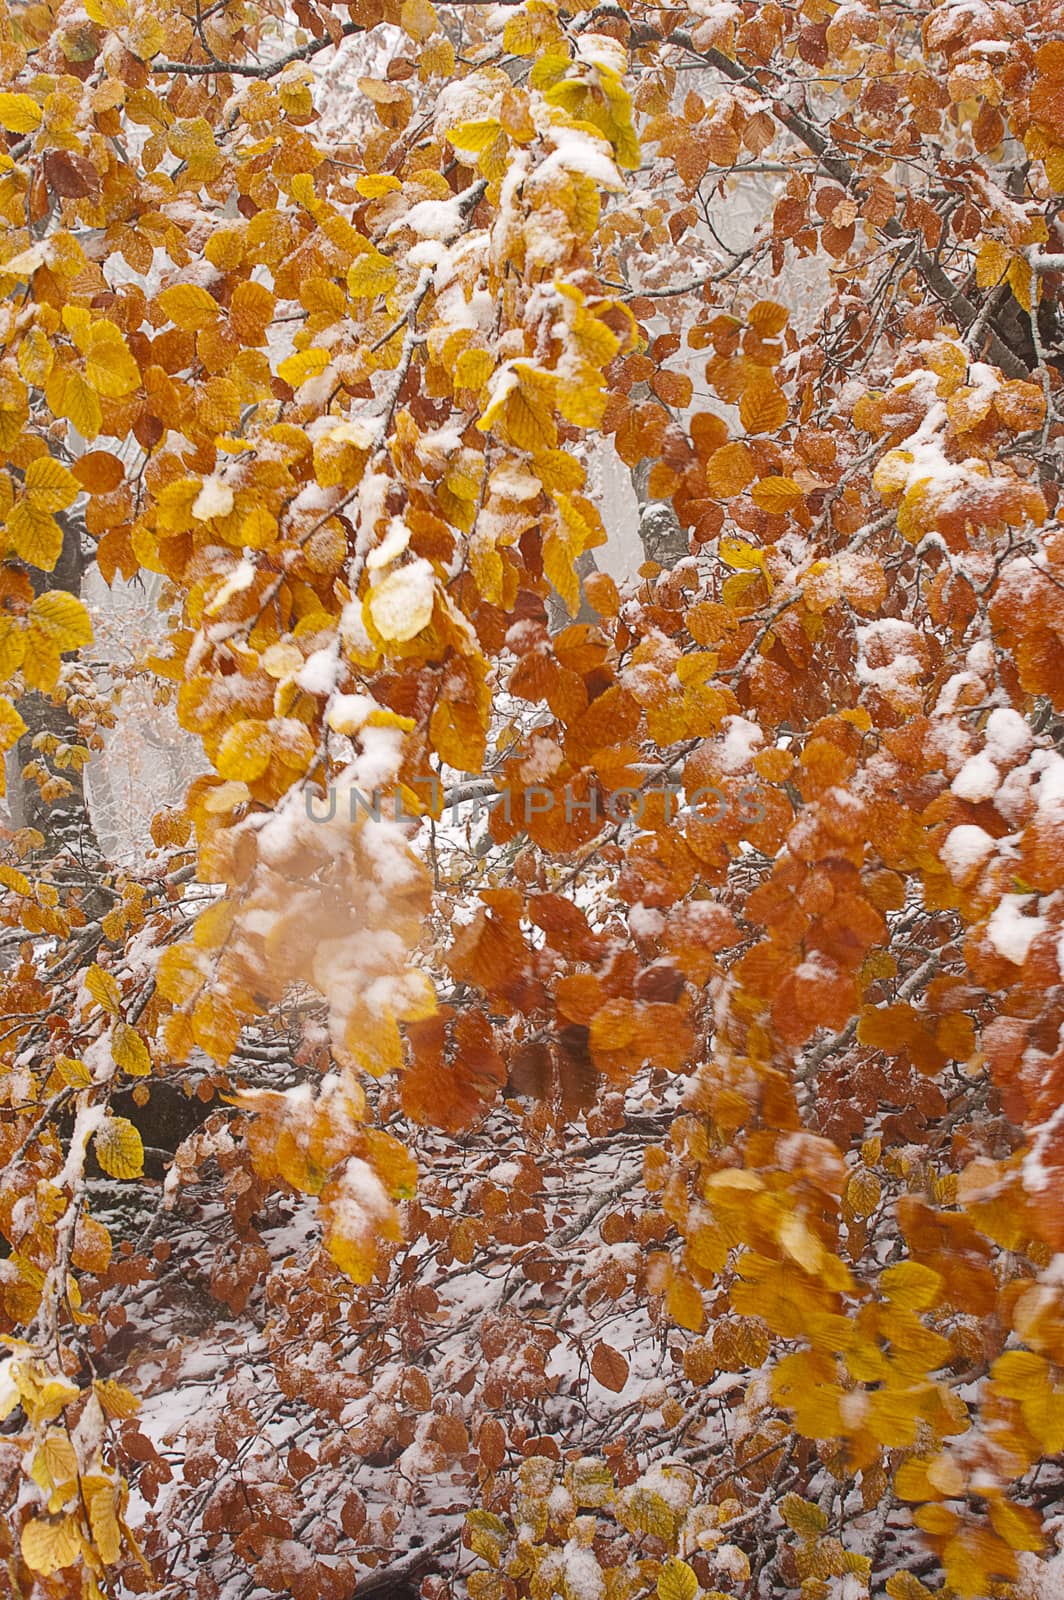 Beech leaves in the snow, colors, autumn by jalonsohu@gmail.com